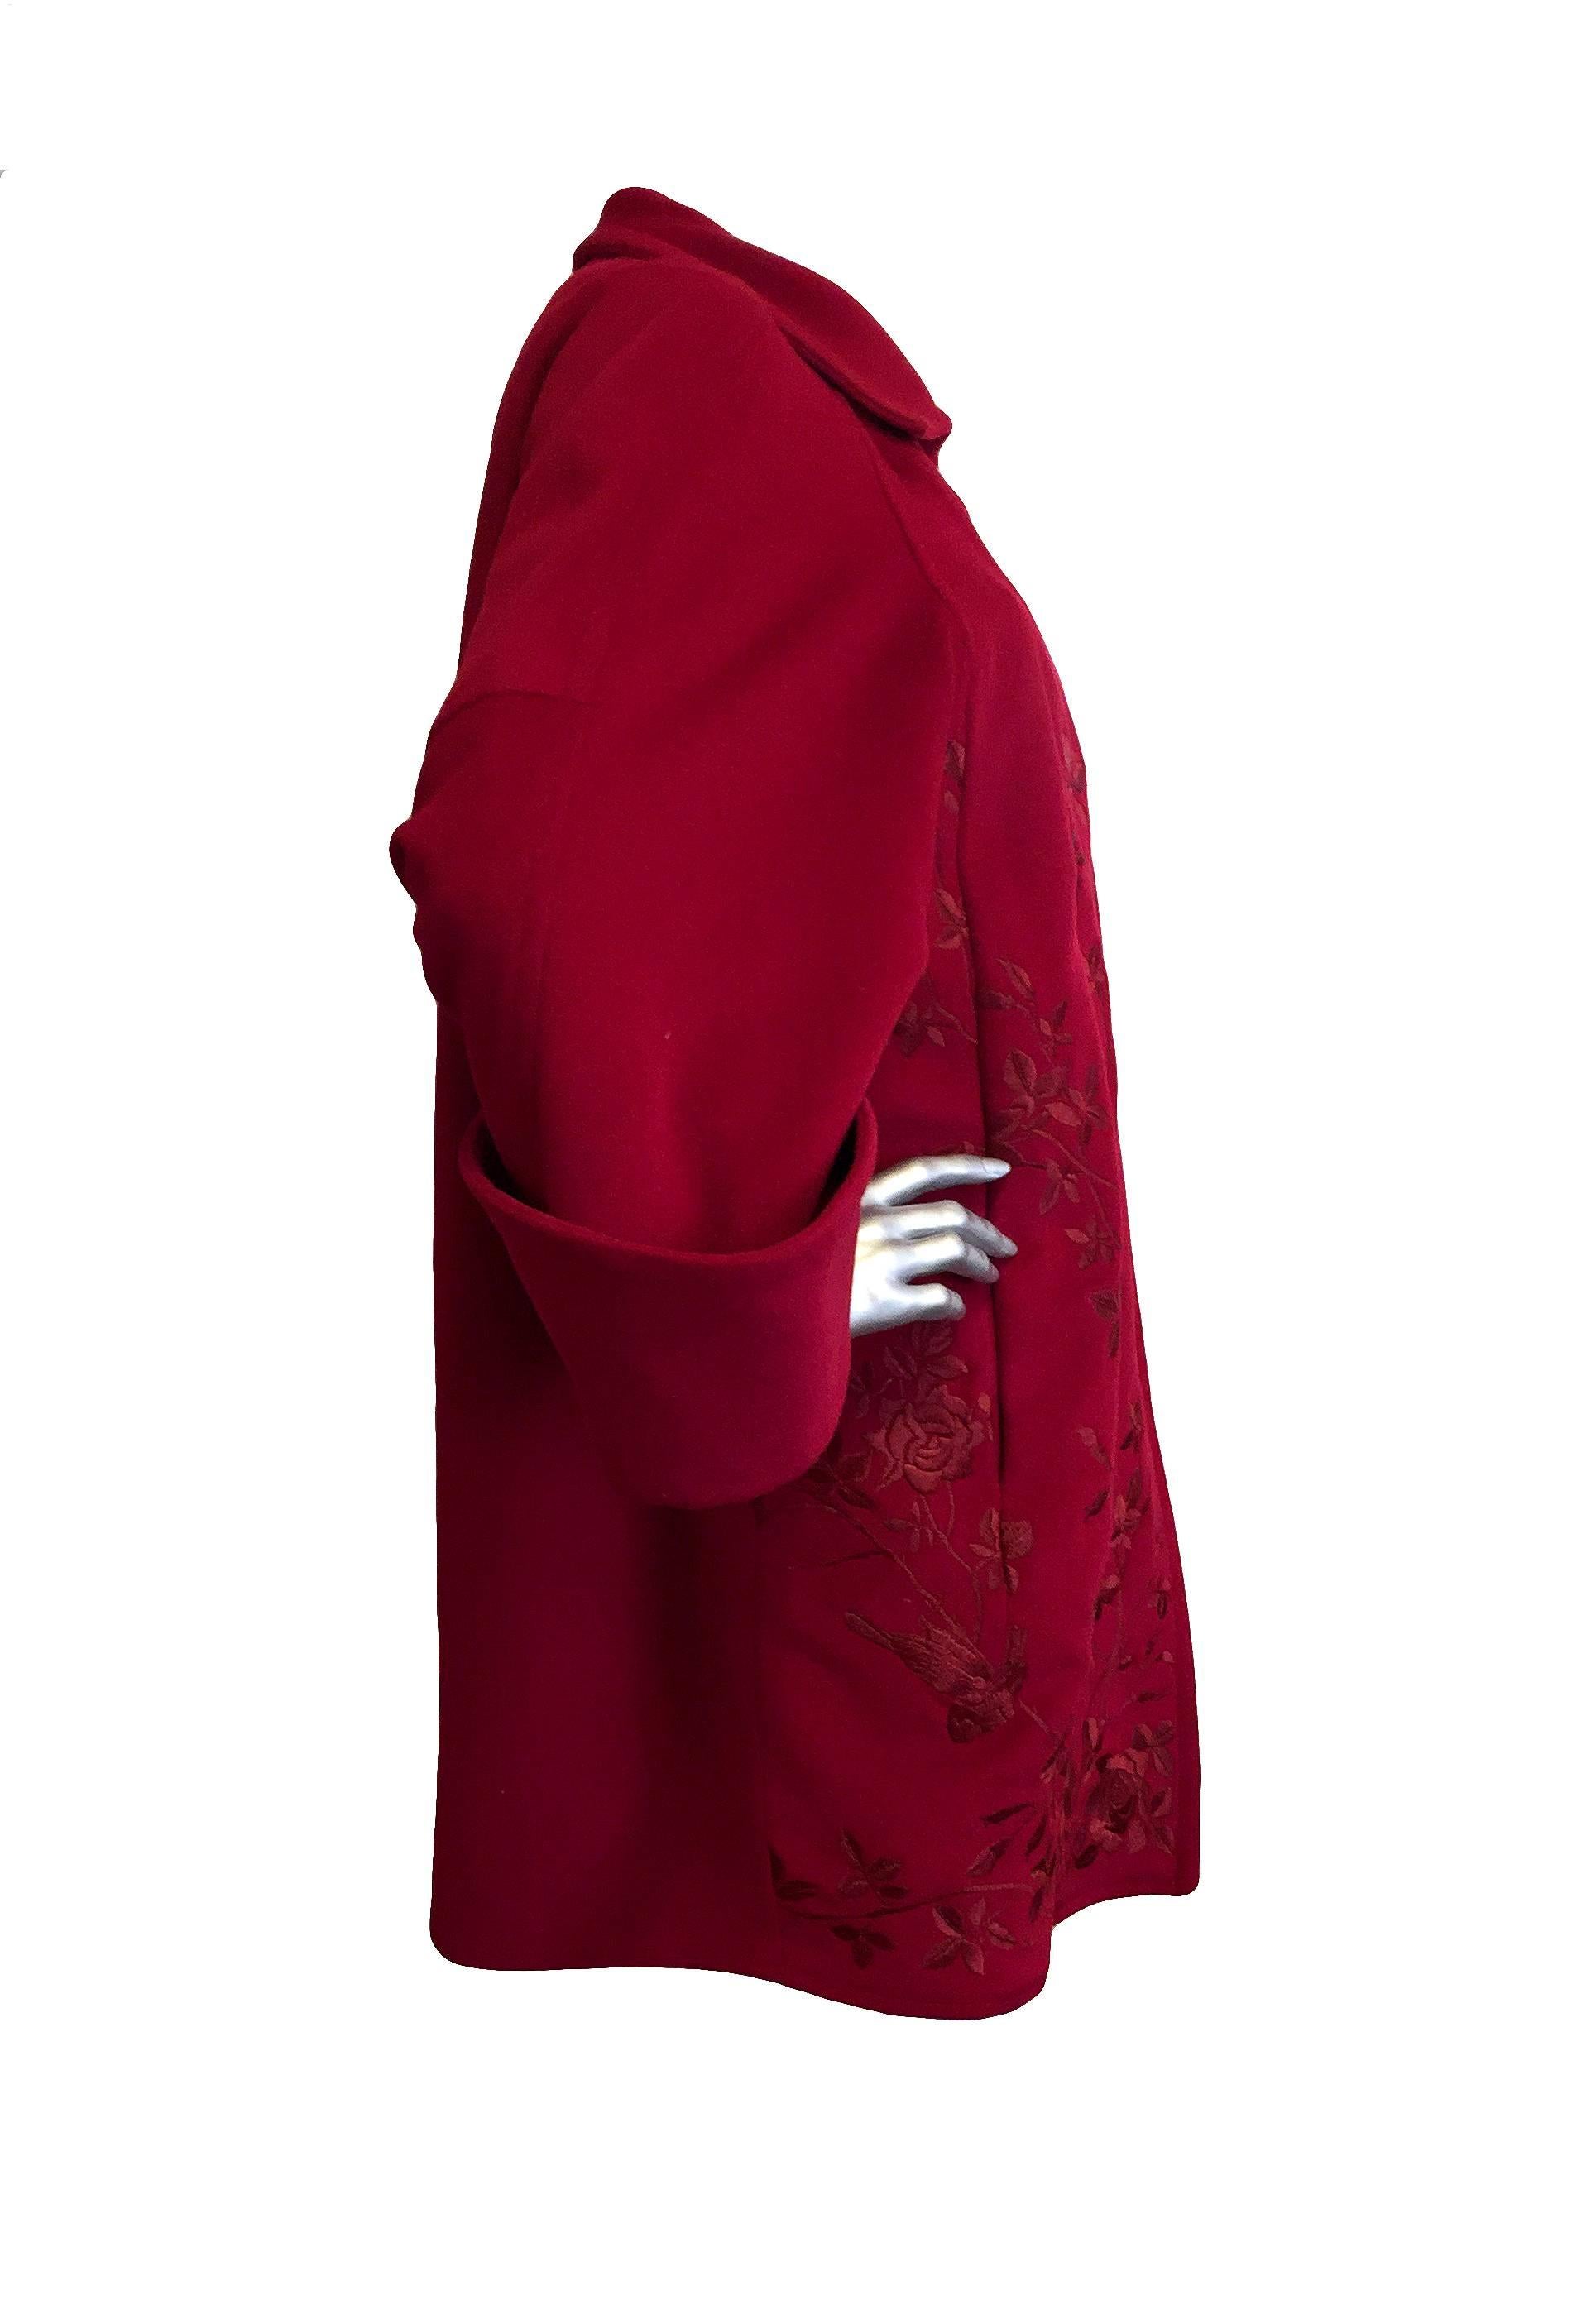 Christian Lacroix burgundy wool and cashmere coat with one button at neckline, intricate floral embroidery, wide cuffed sleeves, pockets, and jacquard lining.